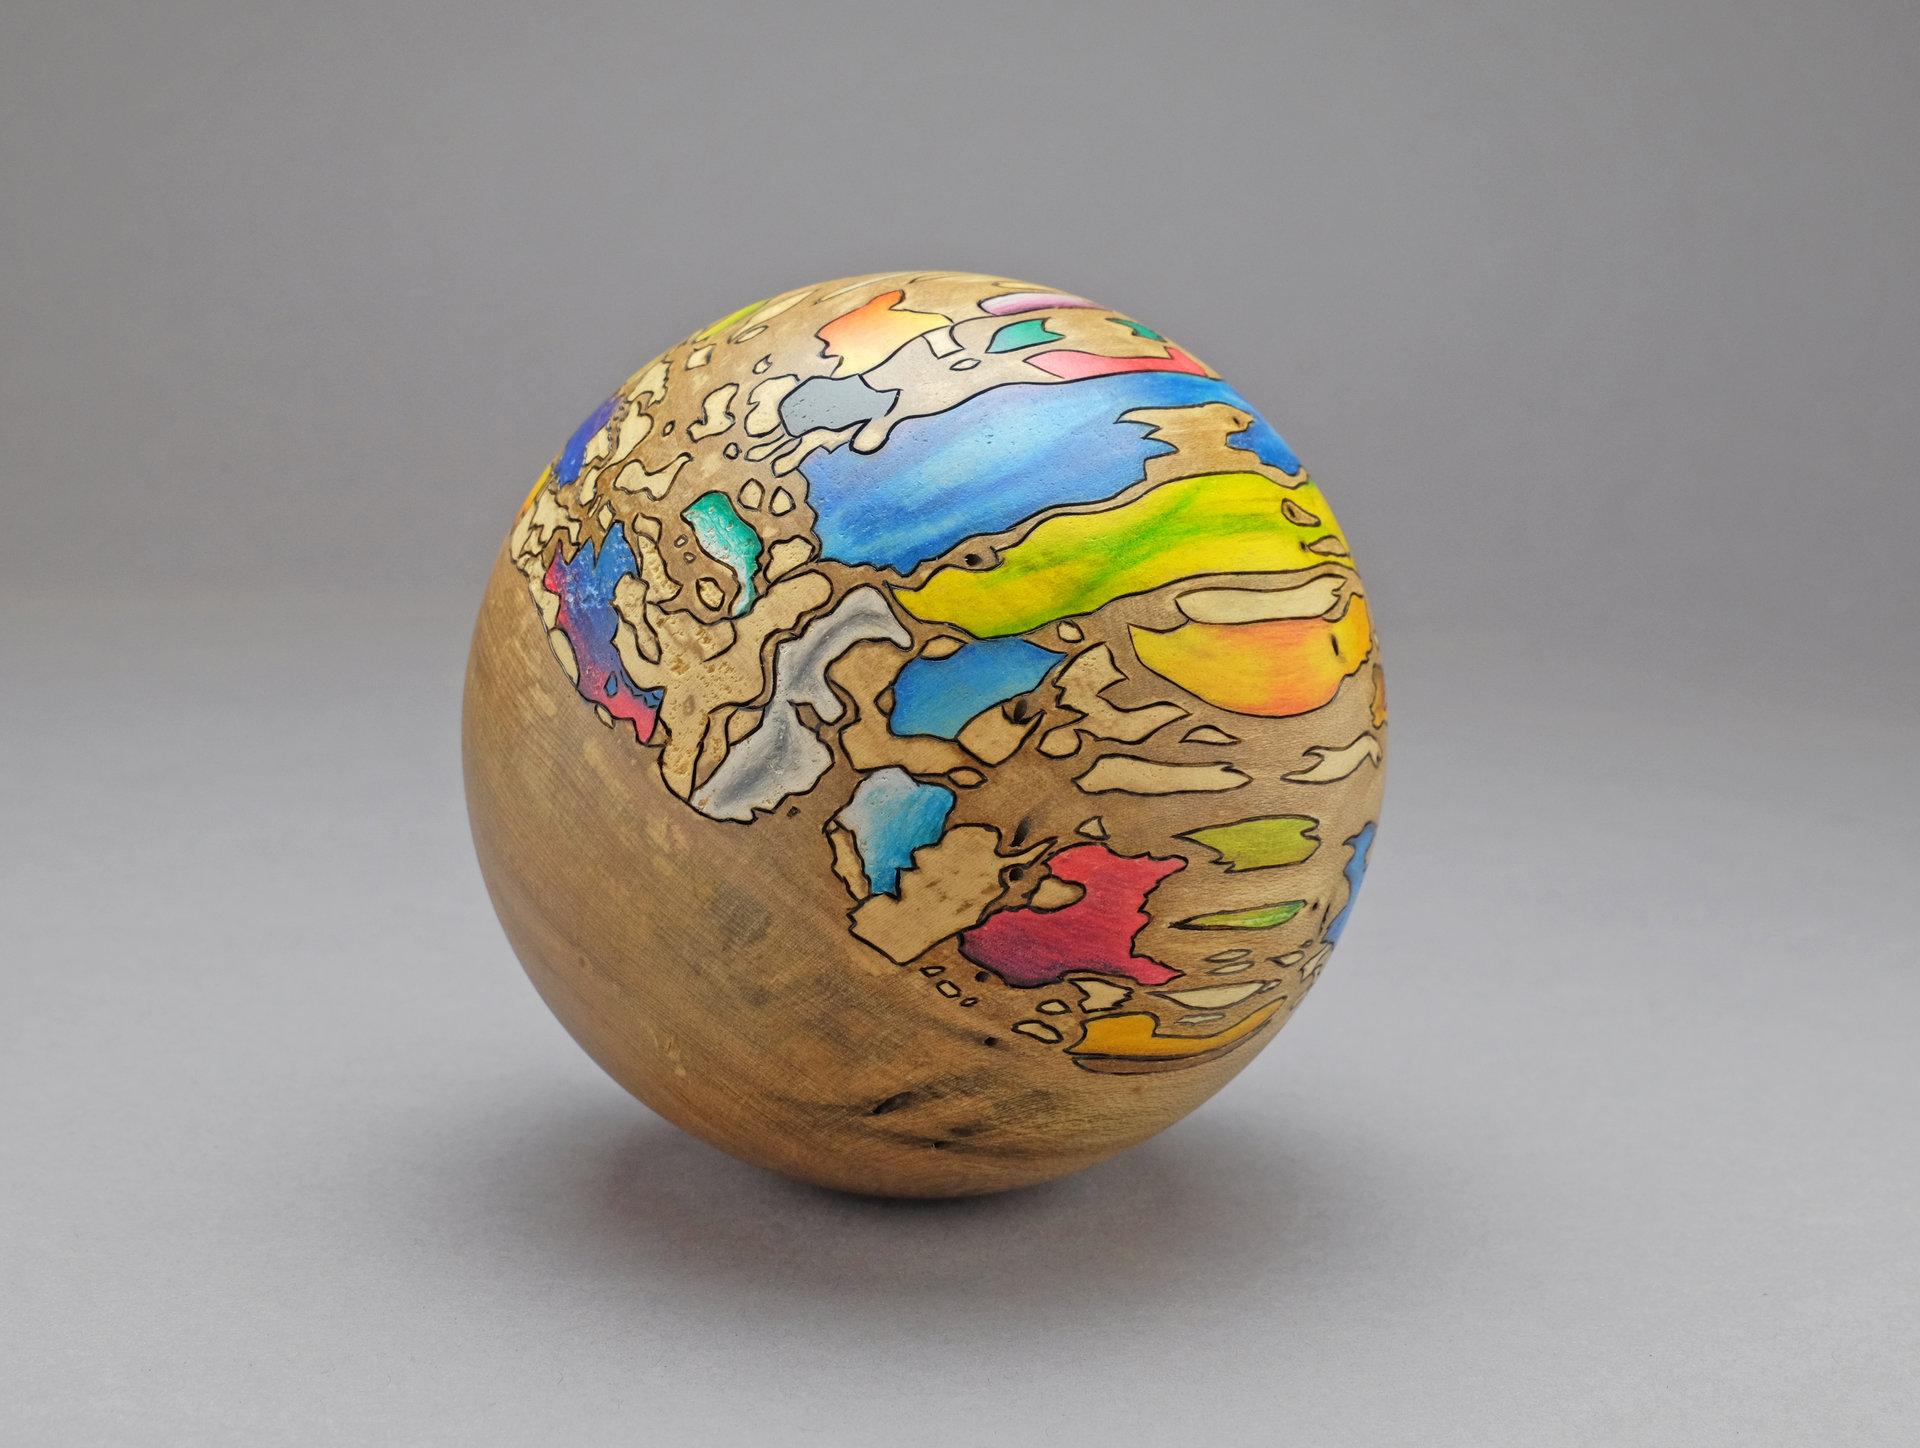 Faux spalted sphere, alternate view.